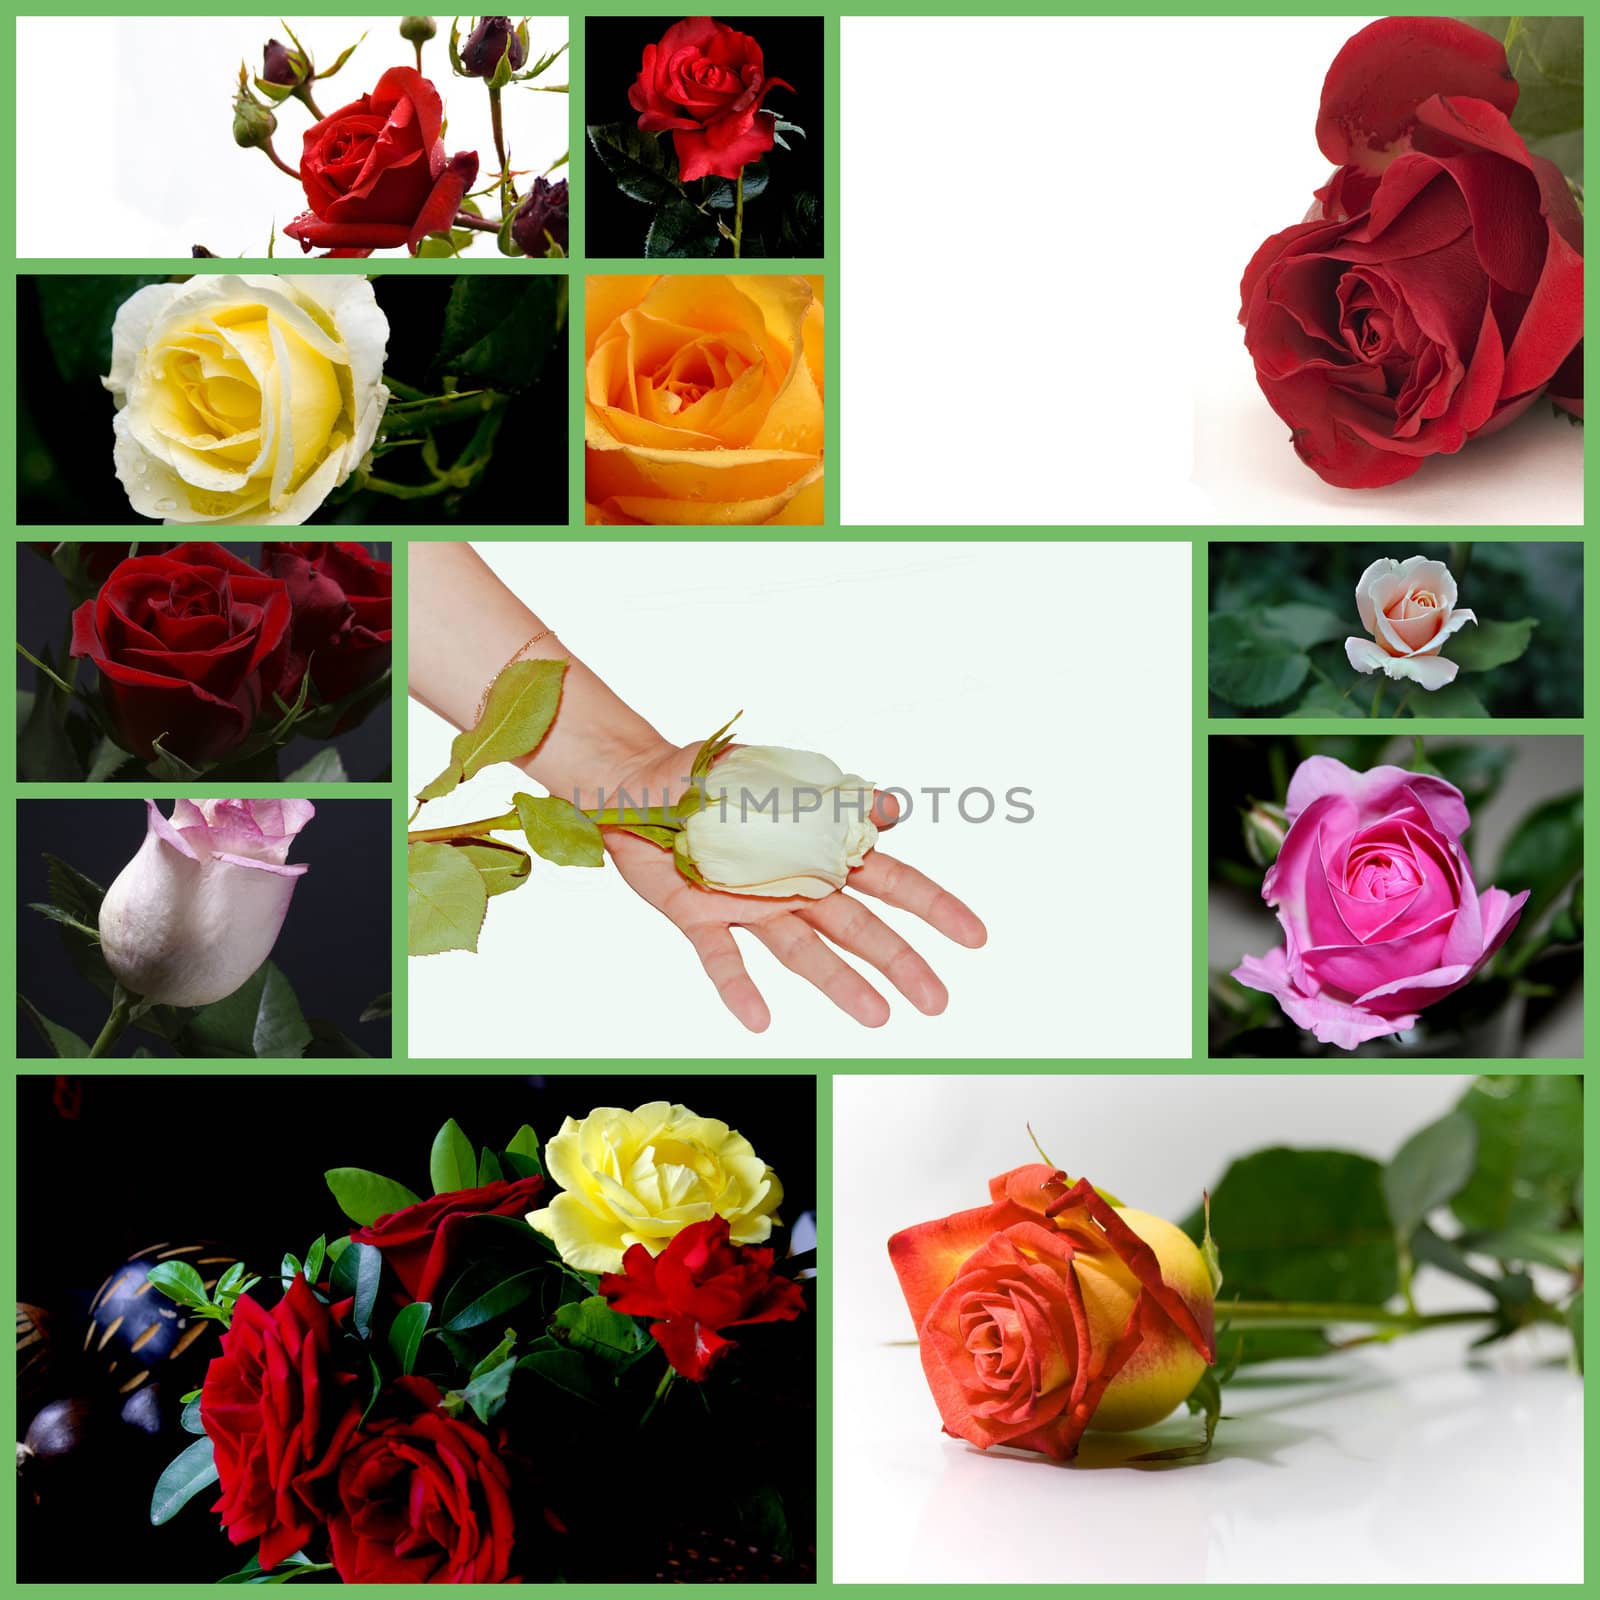 Roses of different colors in the hands of women.